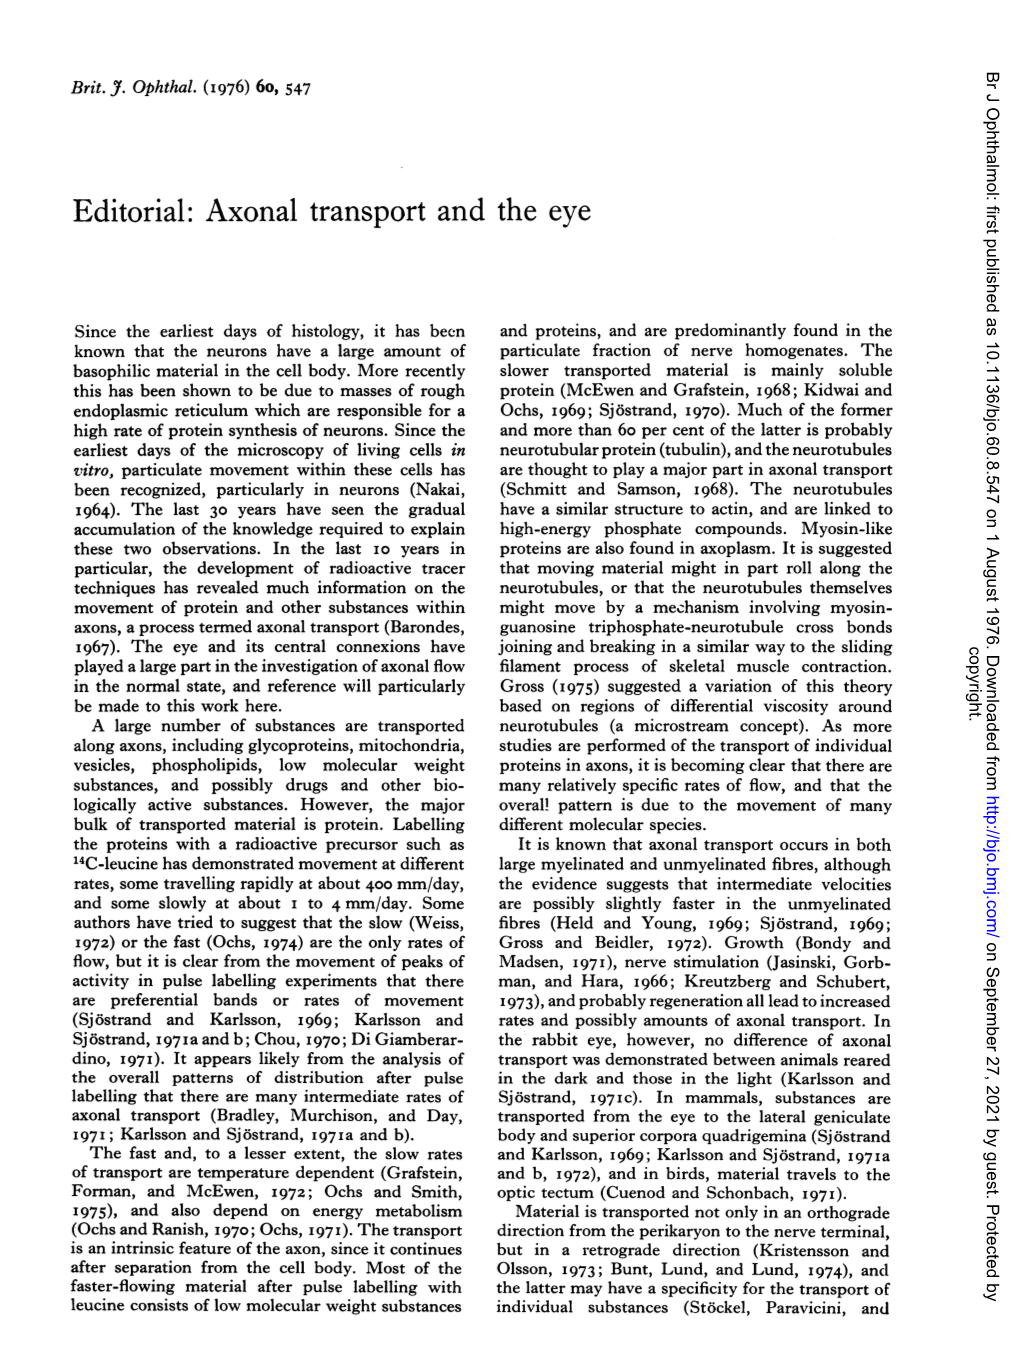 Axonal Transport and the Eye